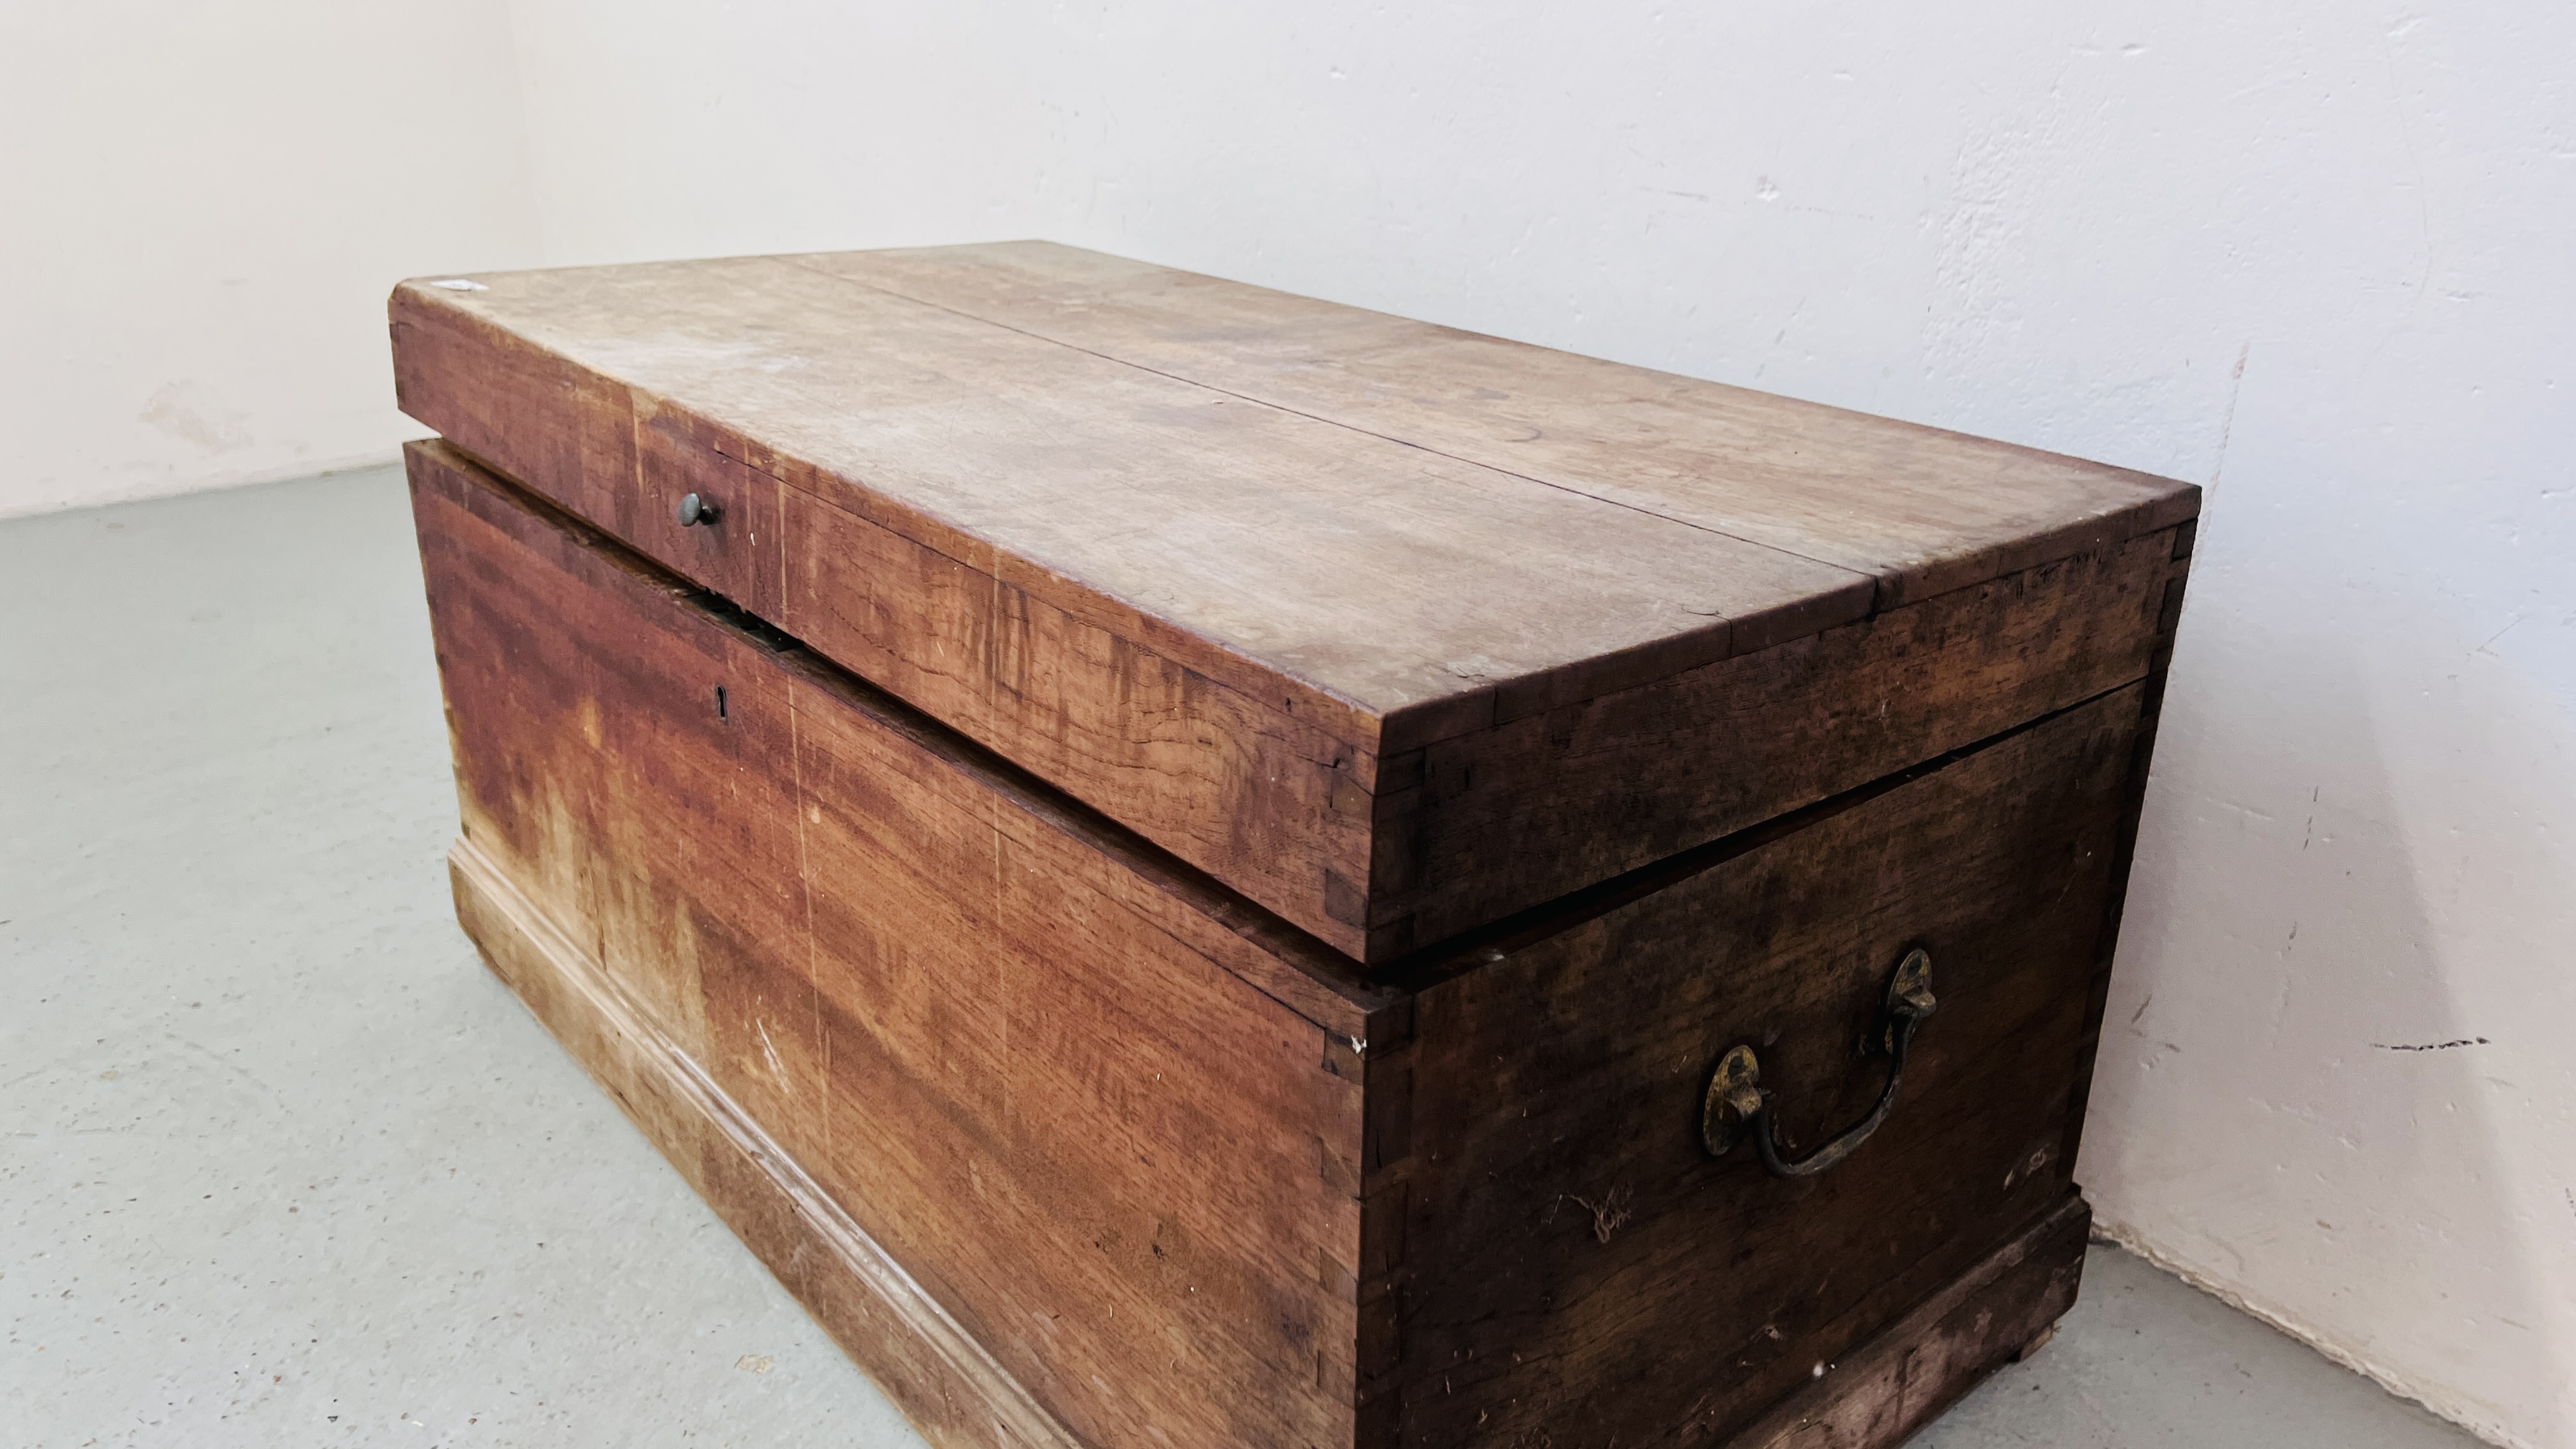 AN ANTIQUE MAHOGANY BLANKET CHEST WITH CANDLE DRAWER WIDTH 93CM. DEPTH 49CM. HEIGHT 46CM. - Image 4 of 10